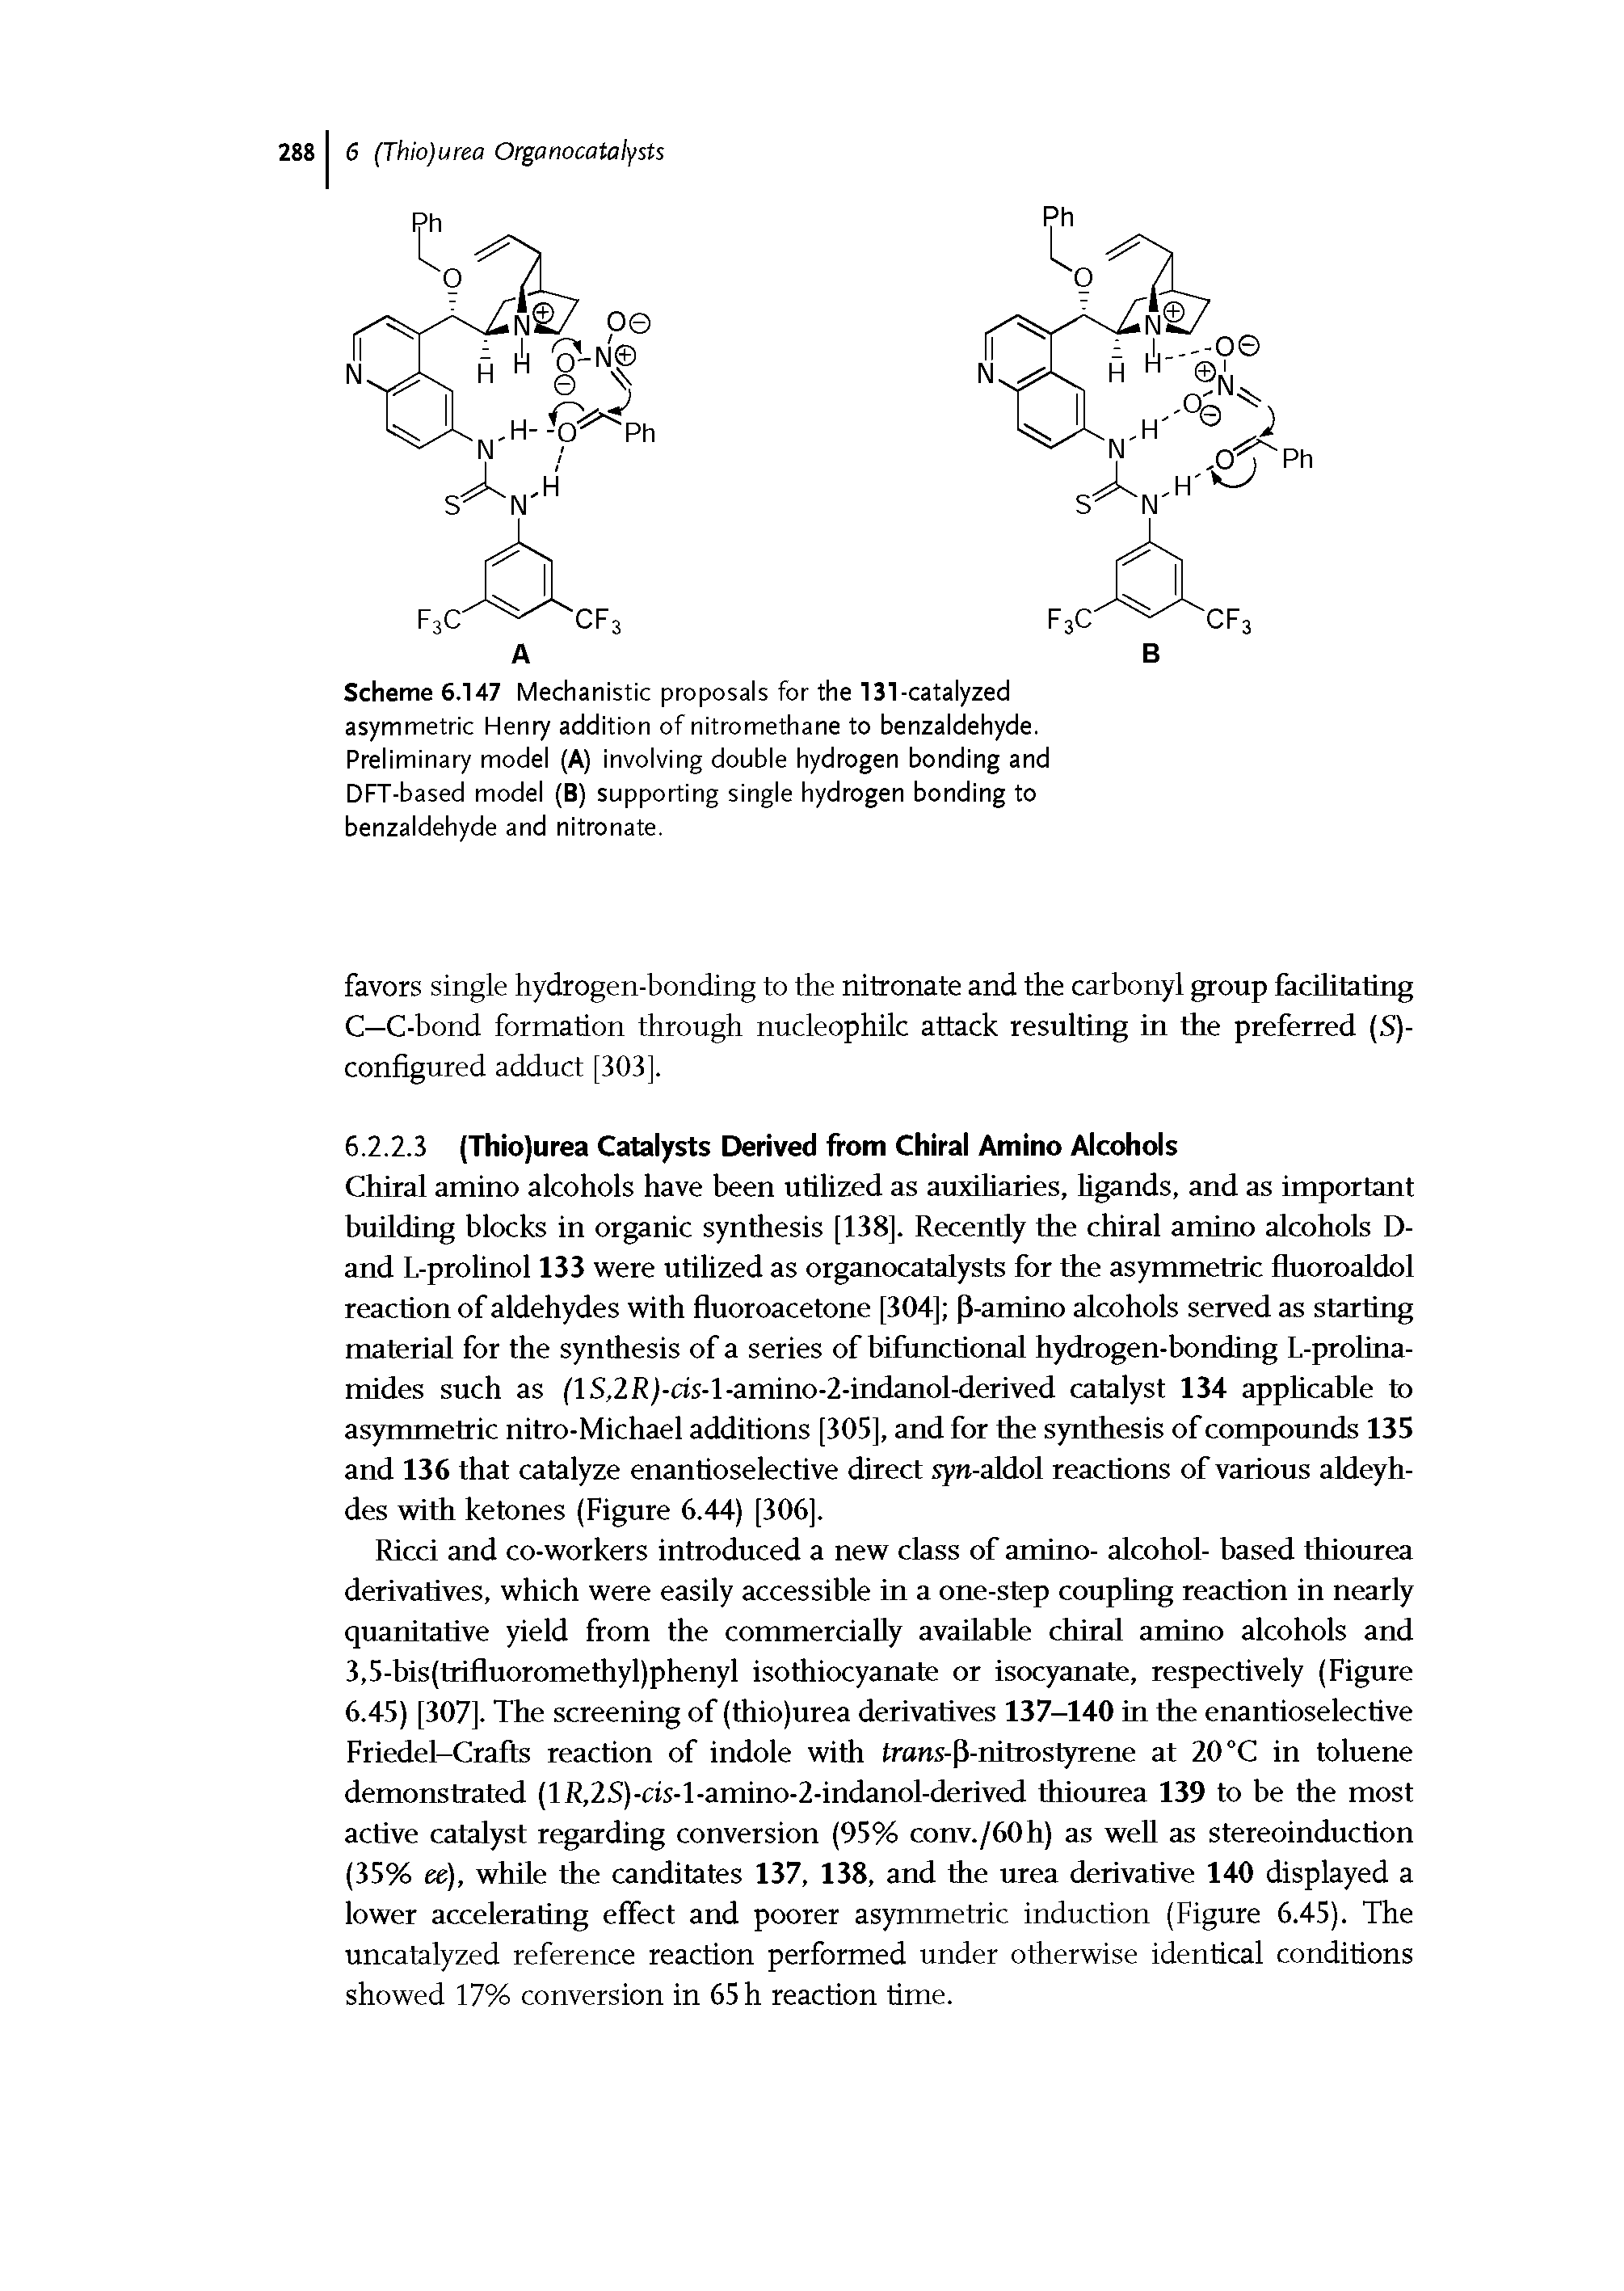 Scheme 6.147 Mechanistic proposals for the 131-catalyzed asymmetric Henry addition of nitromethane to benzaldehyde. Preliminary model (A) Involving double hydrogen bonding and DFT-based model (B) supporting single hydrogen bonding to benzaldehyde and nitronate.